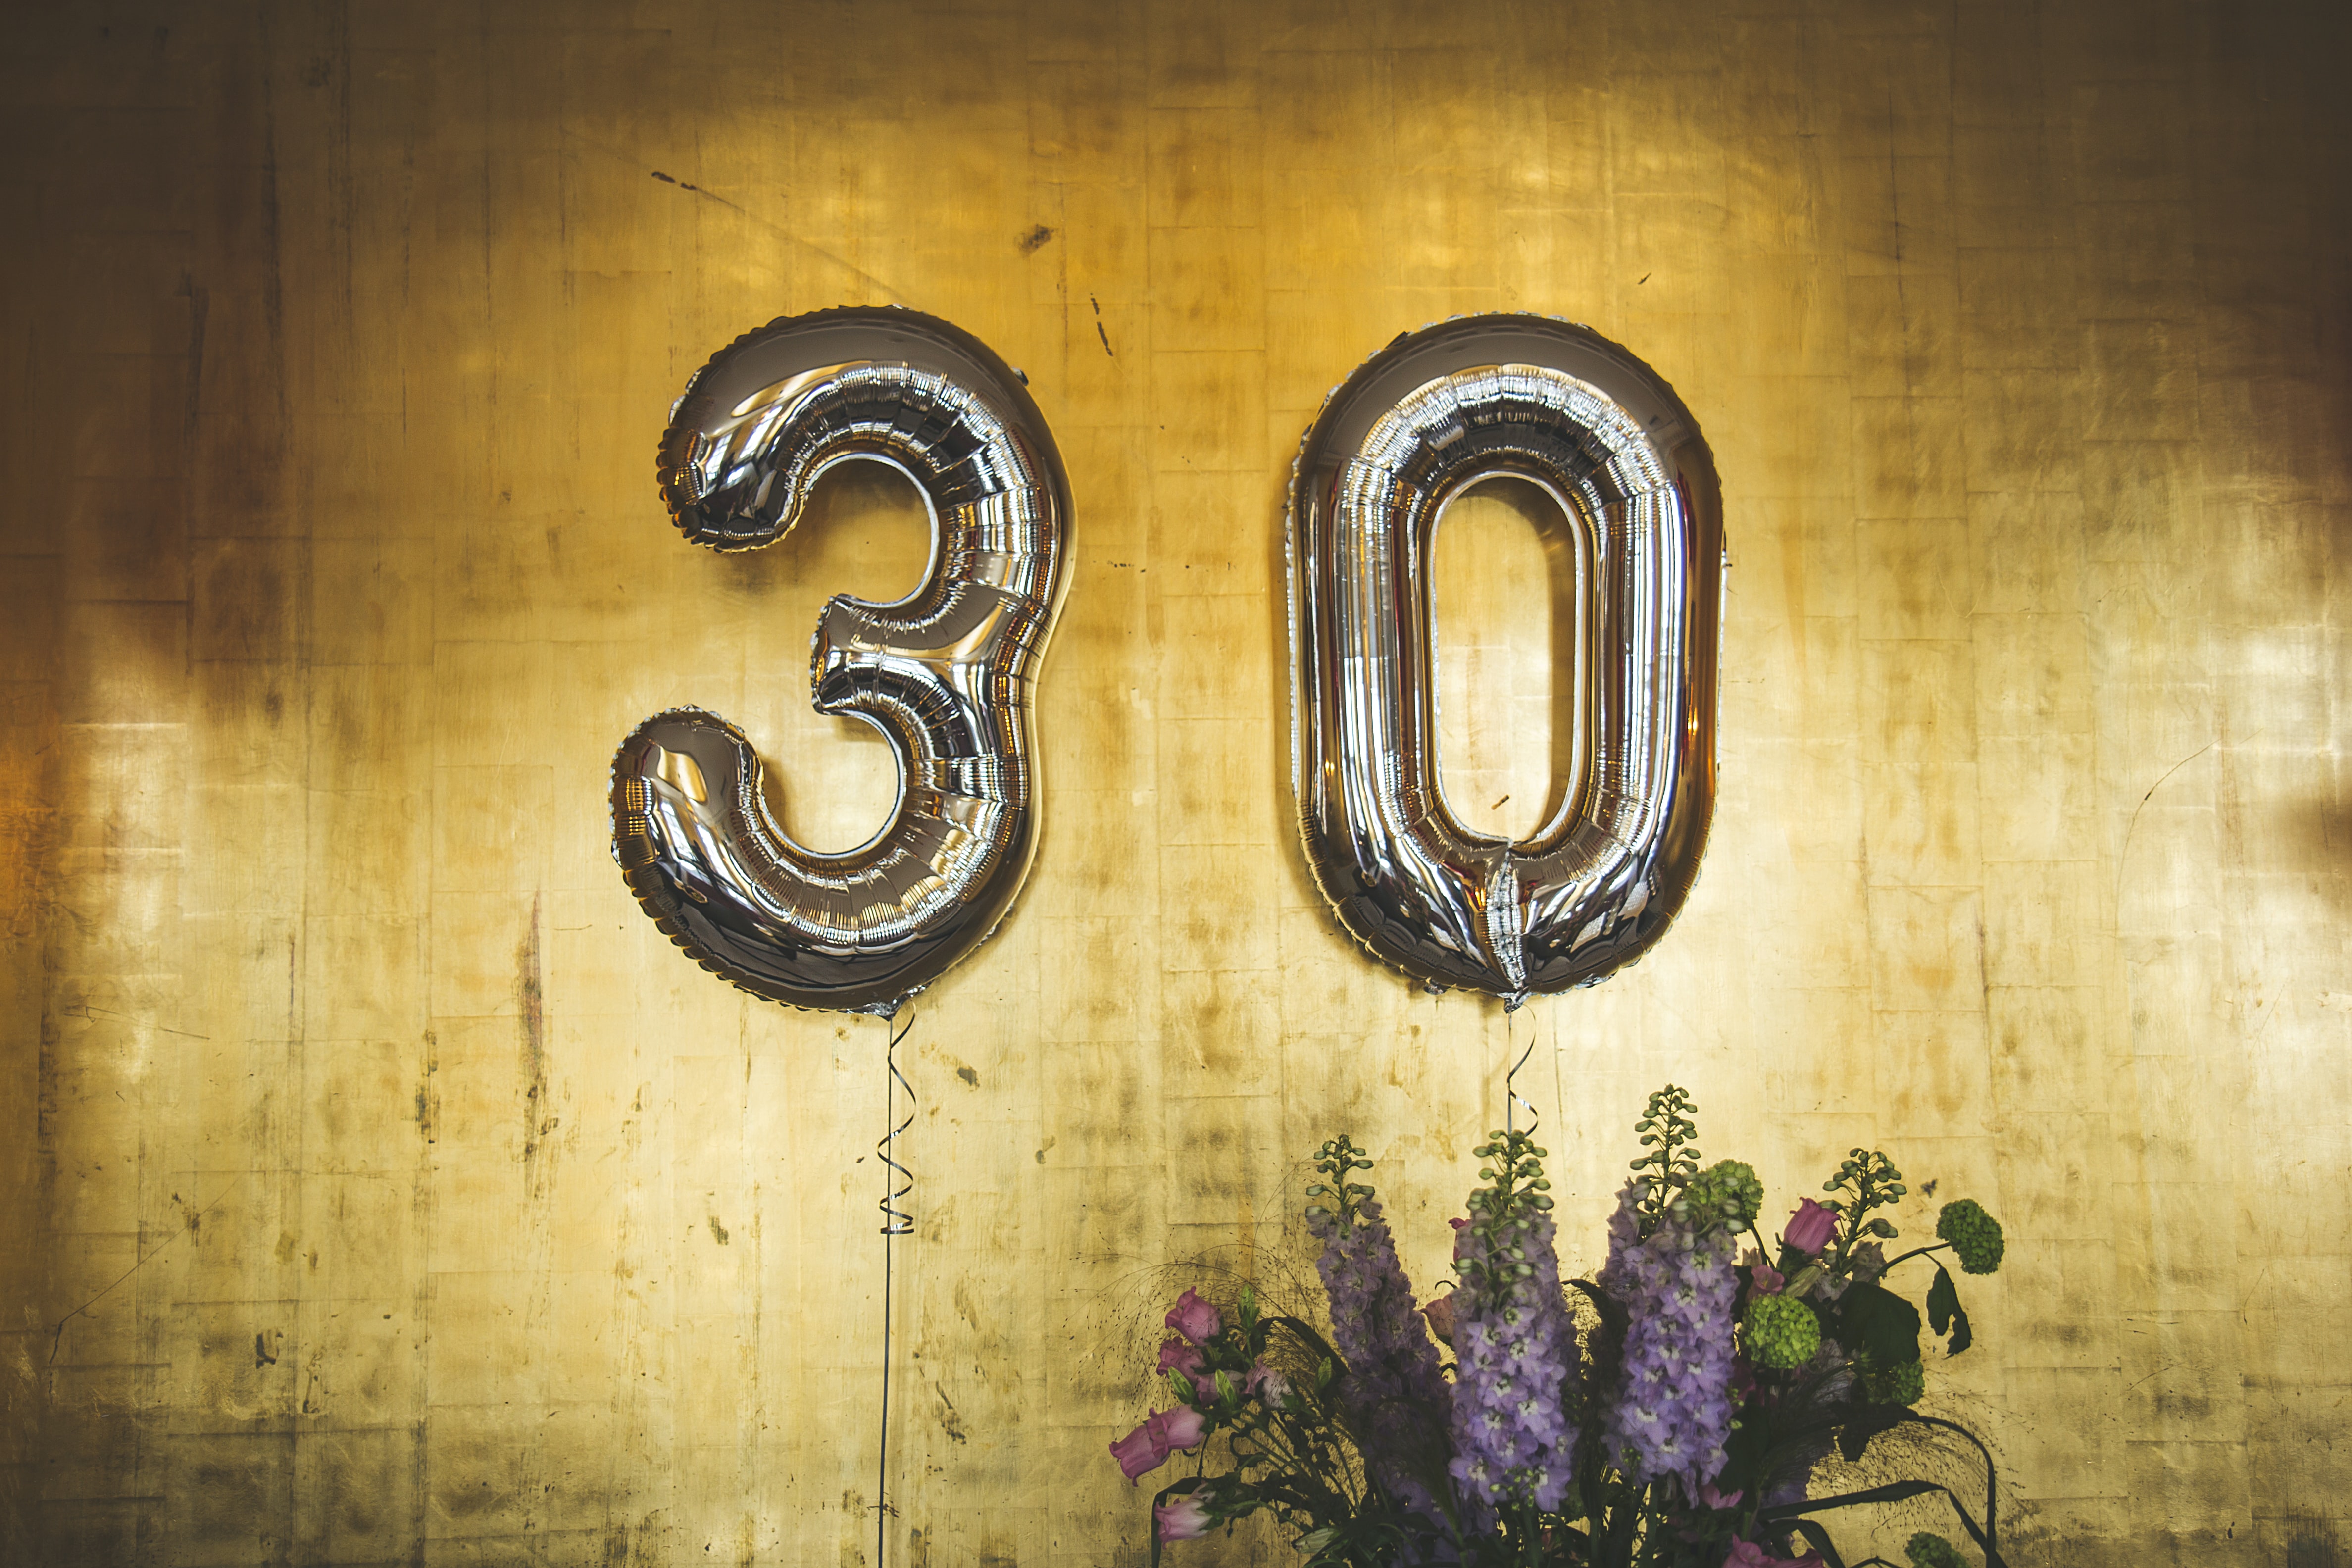 Numbered gold balloons that spell out the number 30 against a wooden backdrop and purple flowers.